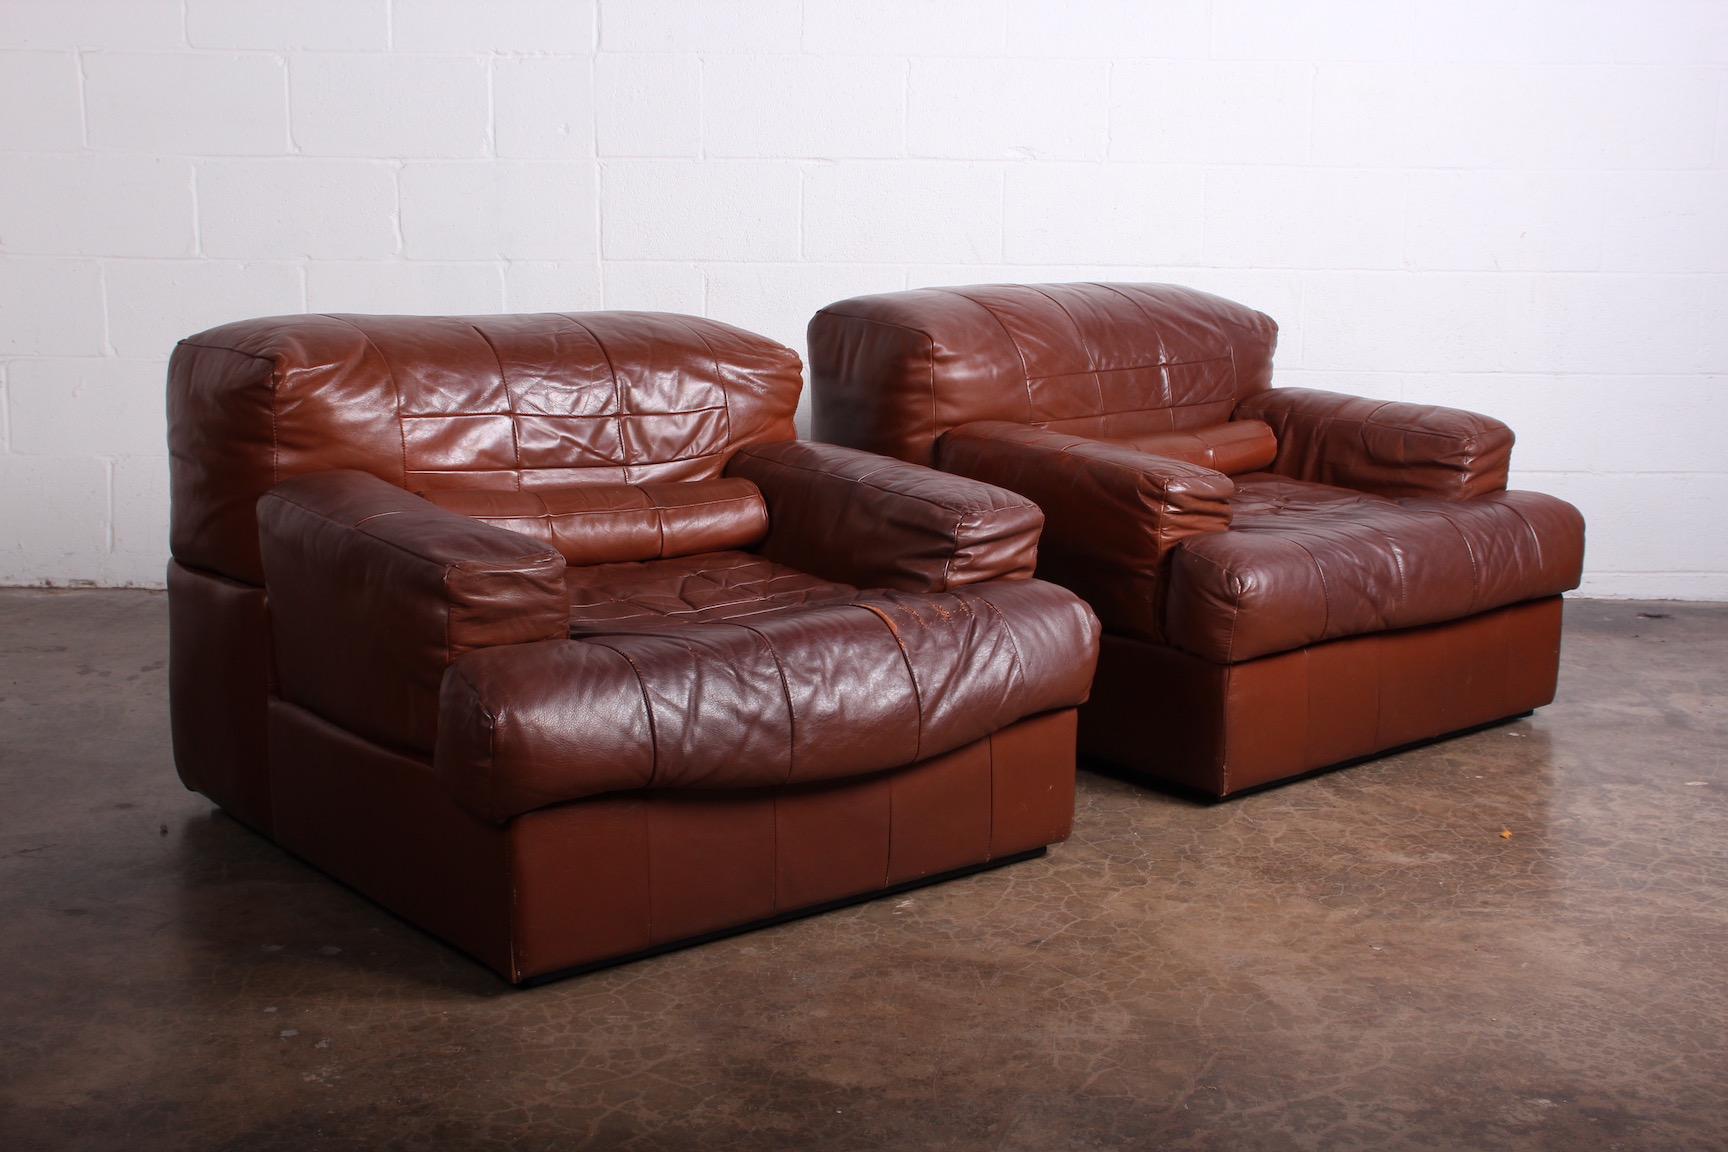 Late 20th Century Pair of Brazilian Leather Lounge Chairs and Ottomans by Pervical Lafer